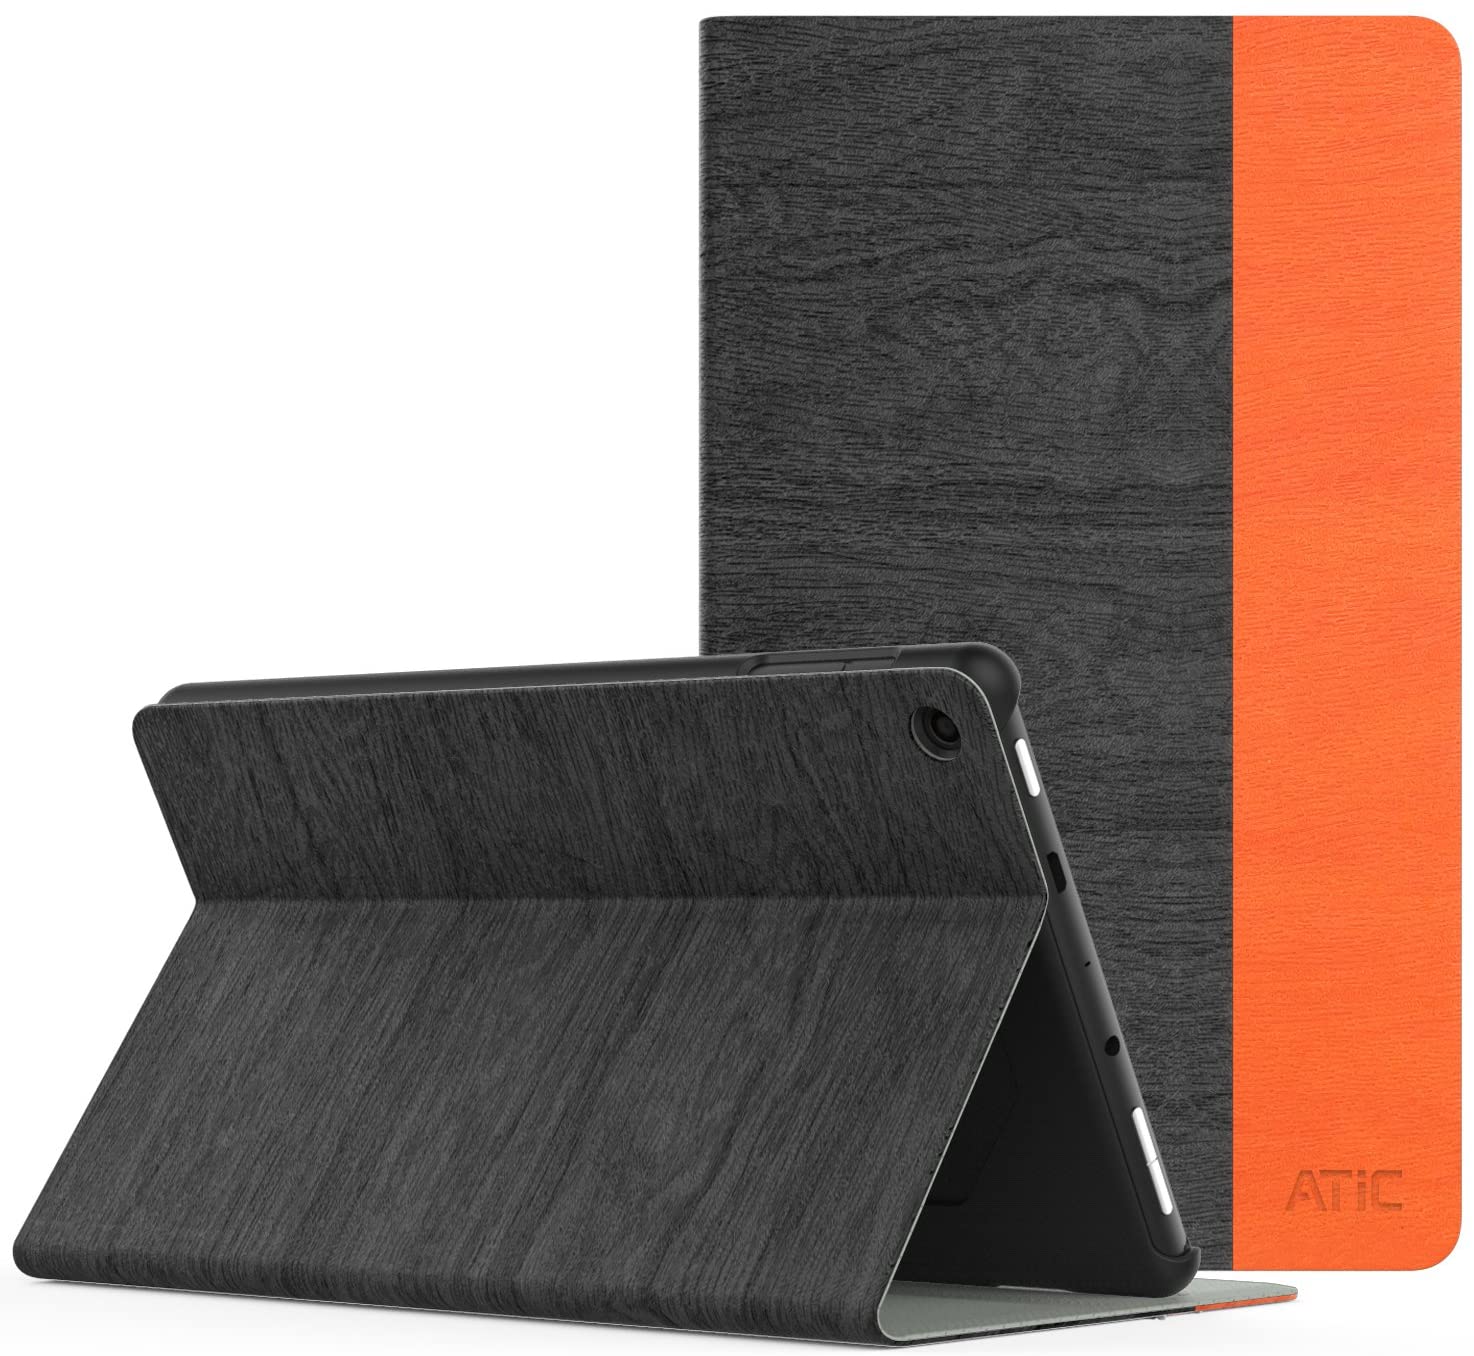 Case Fits All-New Fire 7 Tablet (9th Generation, 2019 Release), Lightweight Slim Shell Tri-fold Stand Cover Translucent Case with Auto Wake/Sleep for Amazon Fire 7 Tablet - hybrid color - e4c